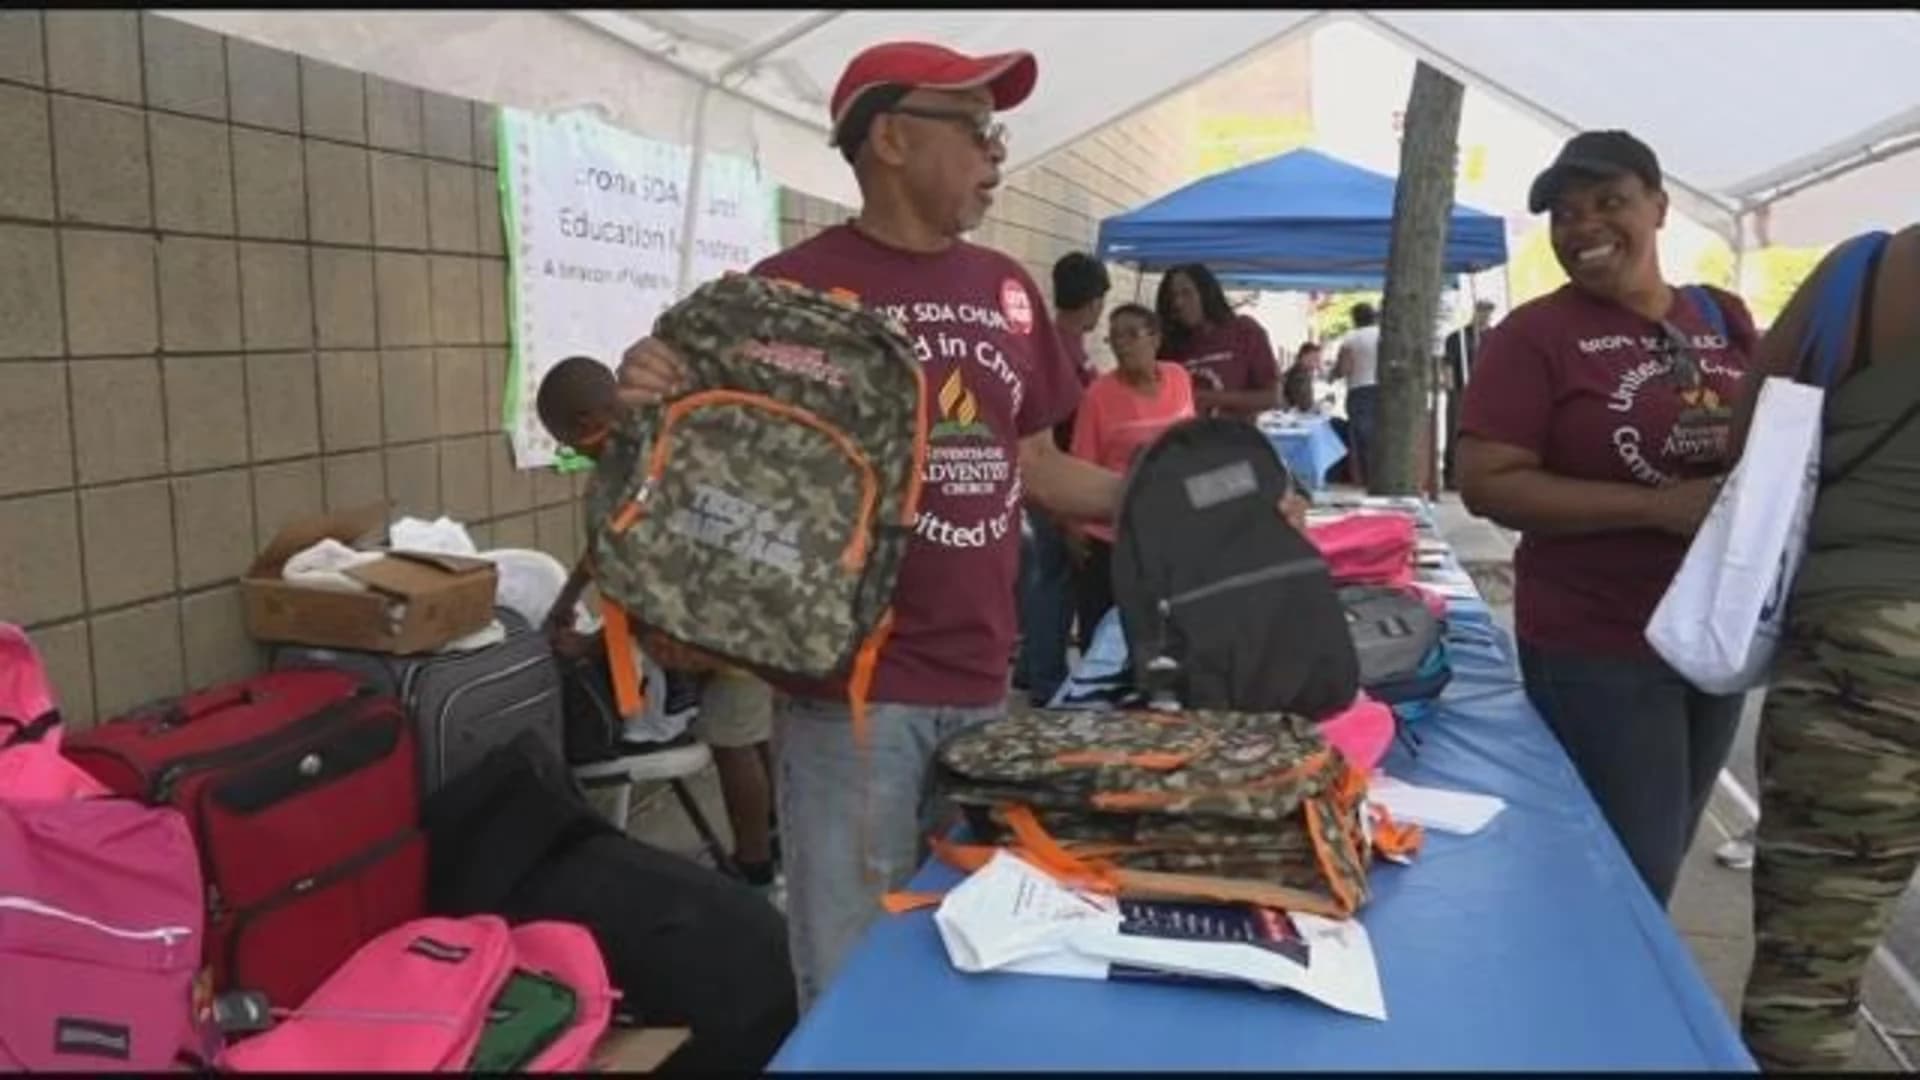 Back-to-school party brings fun, free supplies to Claremont students